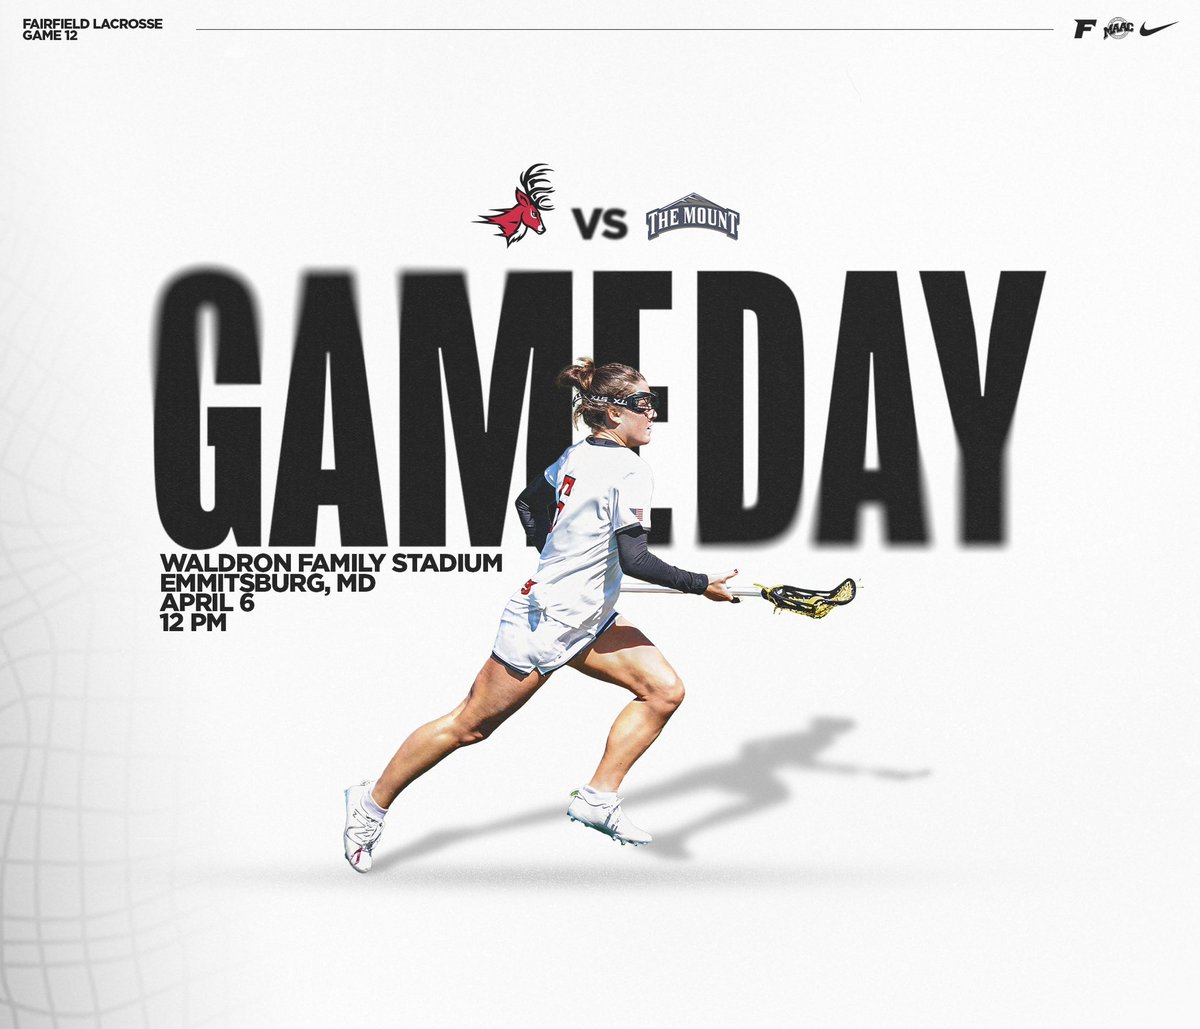 Noon draw at The Mount for the #25 Stags!   📺 @ESPNPlus 🎥 bit.ly/3VONXZY 📊 bit.ly/3VJ1kuI   #WeAreStags 🤘🥍